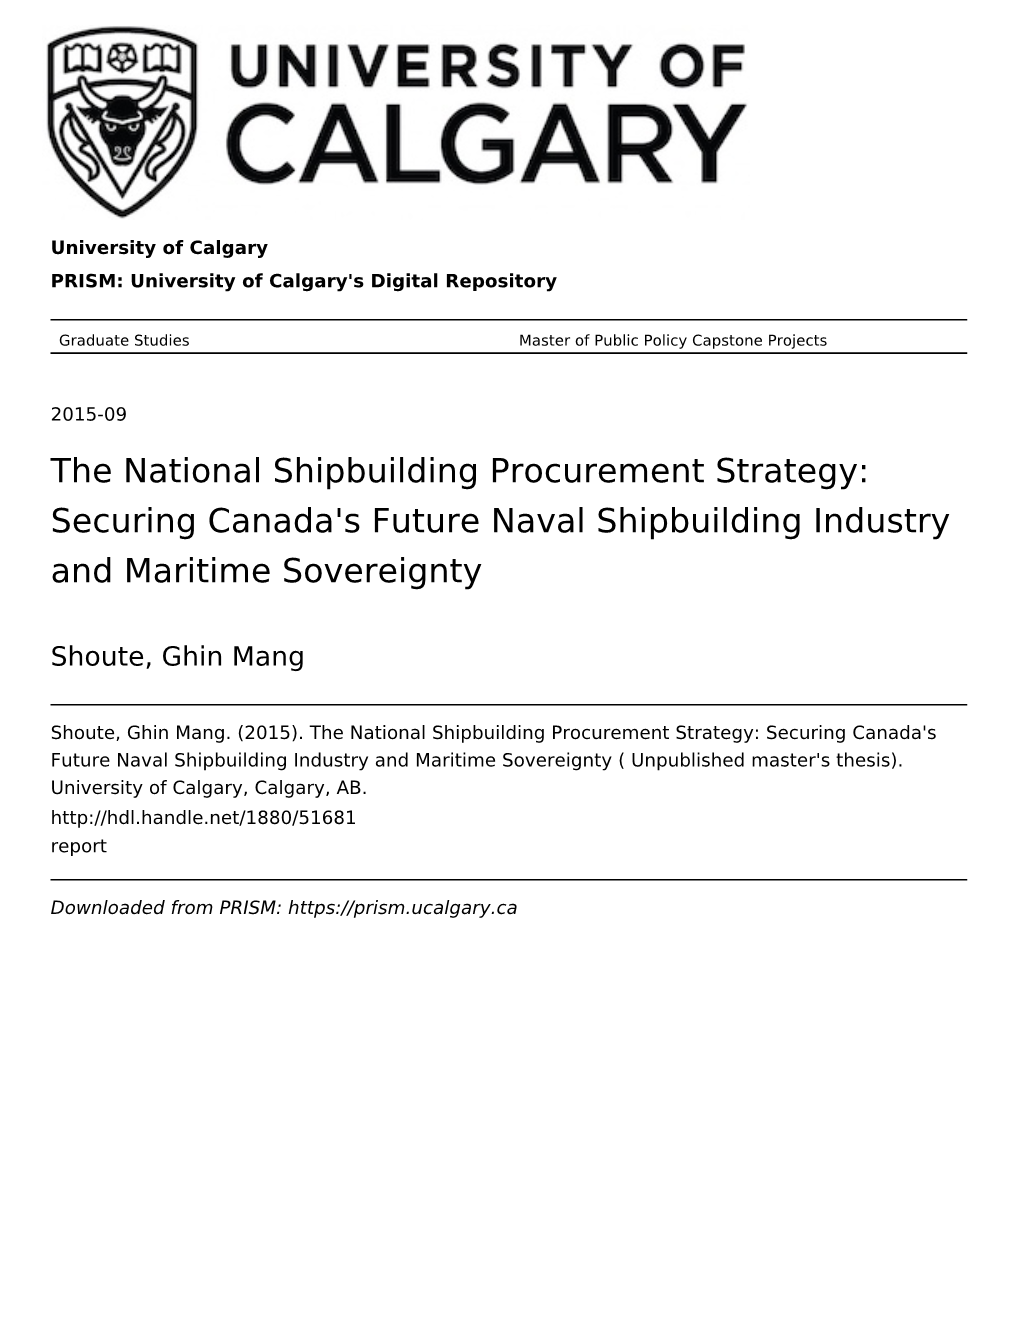 The National Shipbuilding Procurement Strategy: Securing Canada's Future Naval Shipbuilding Industry and Maritime Sovereignty